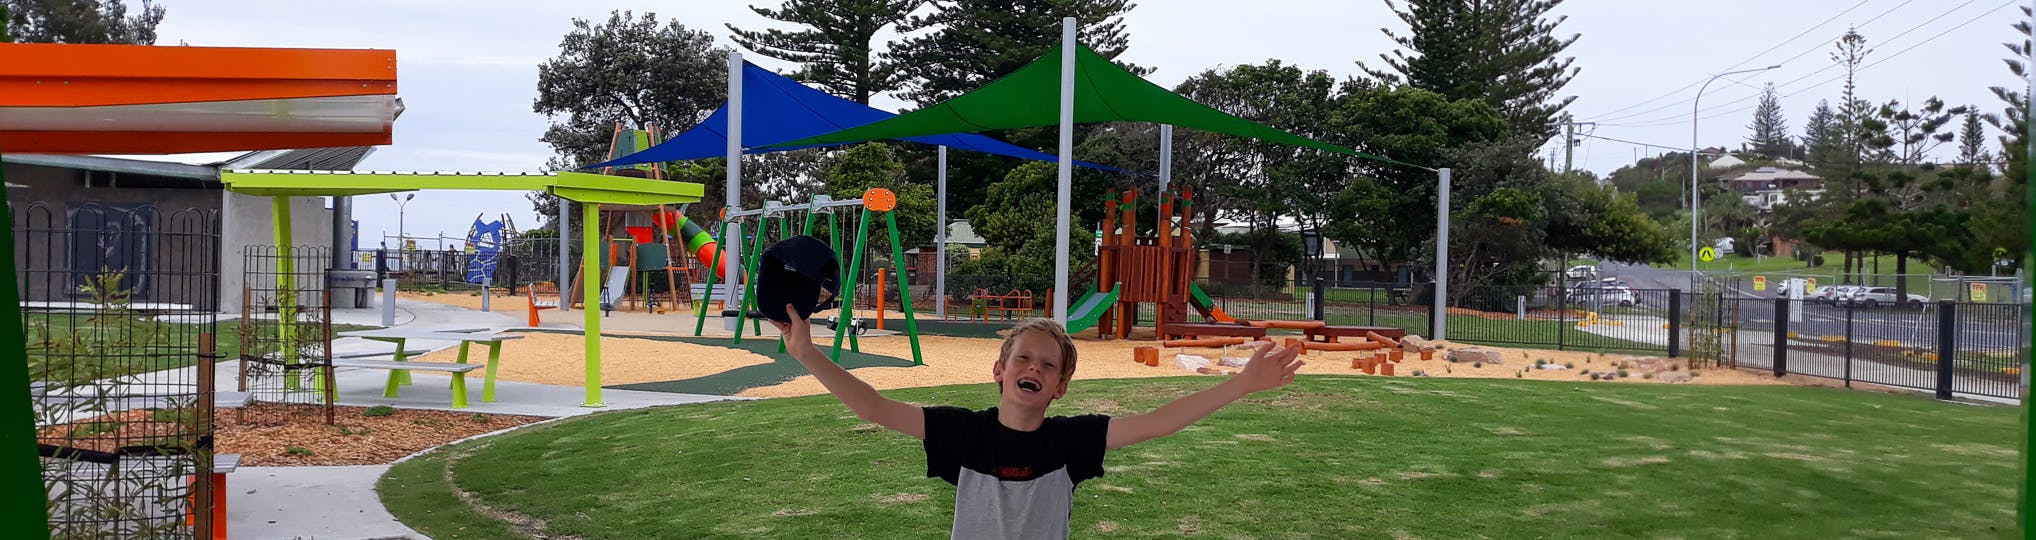 The Playground is Open and Ready for Fun at Woolgoolga Reserve, with fences removed from Tuesday December 22!